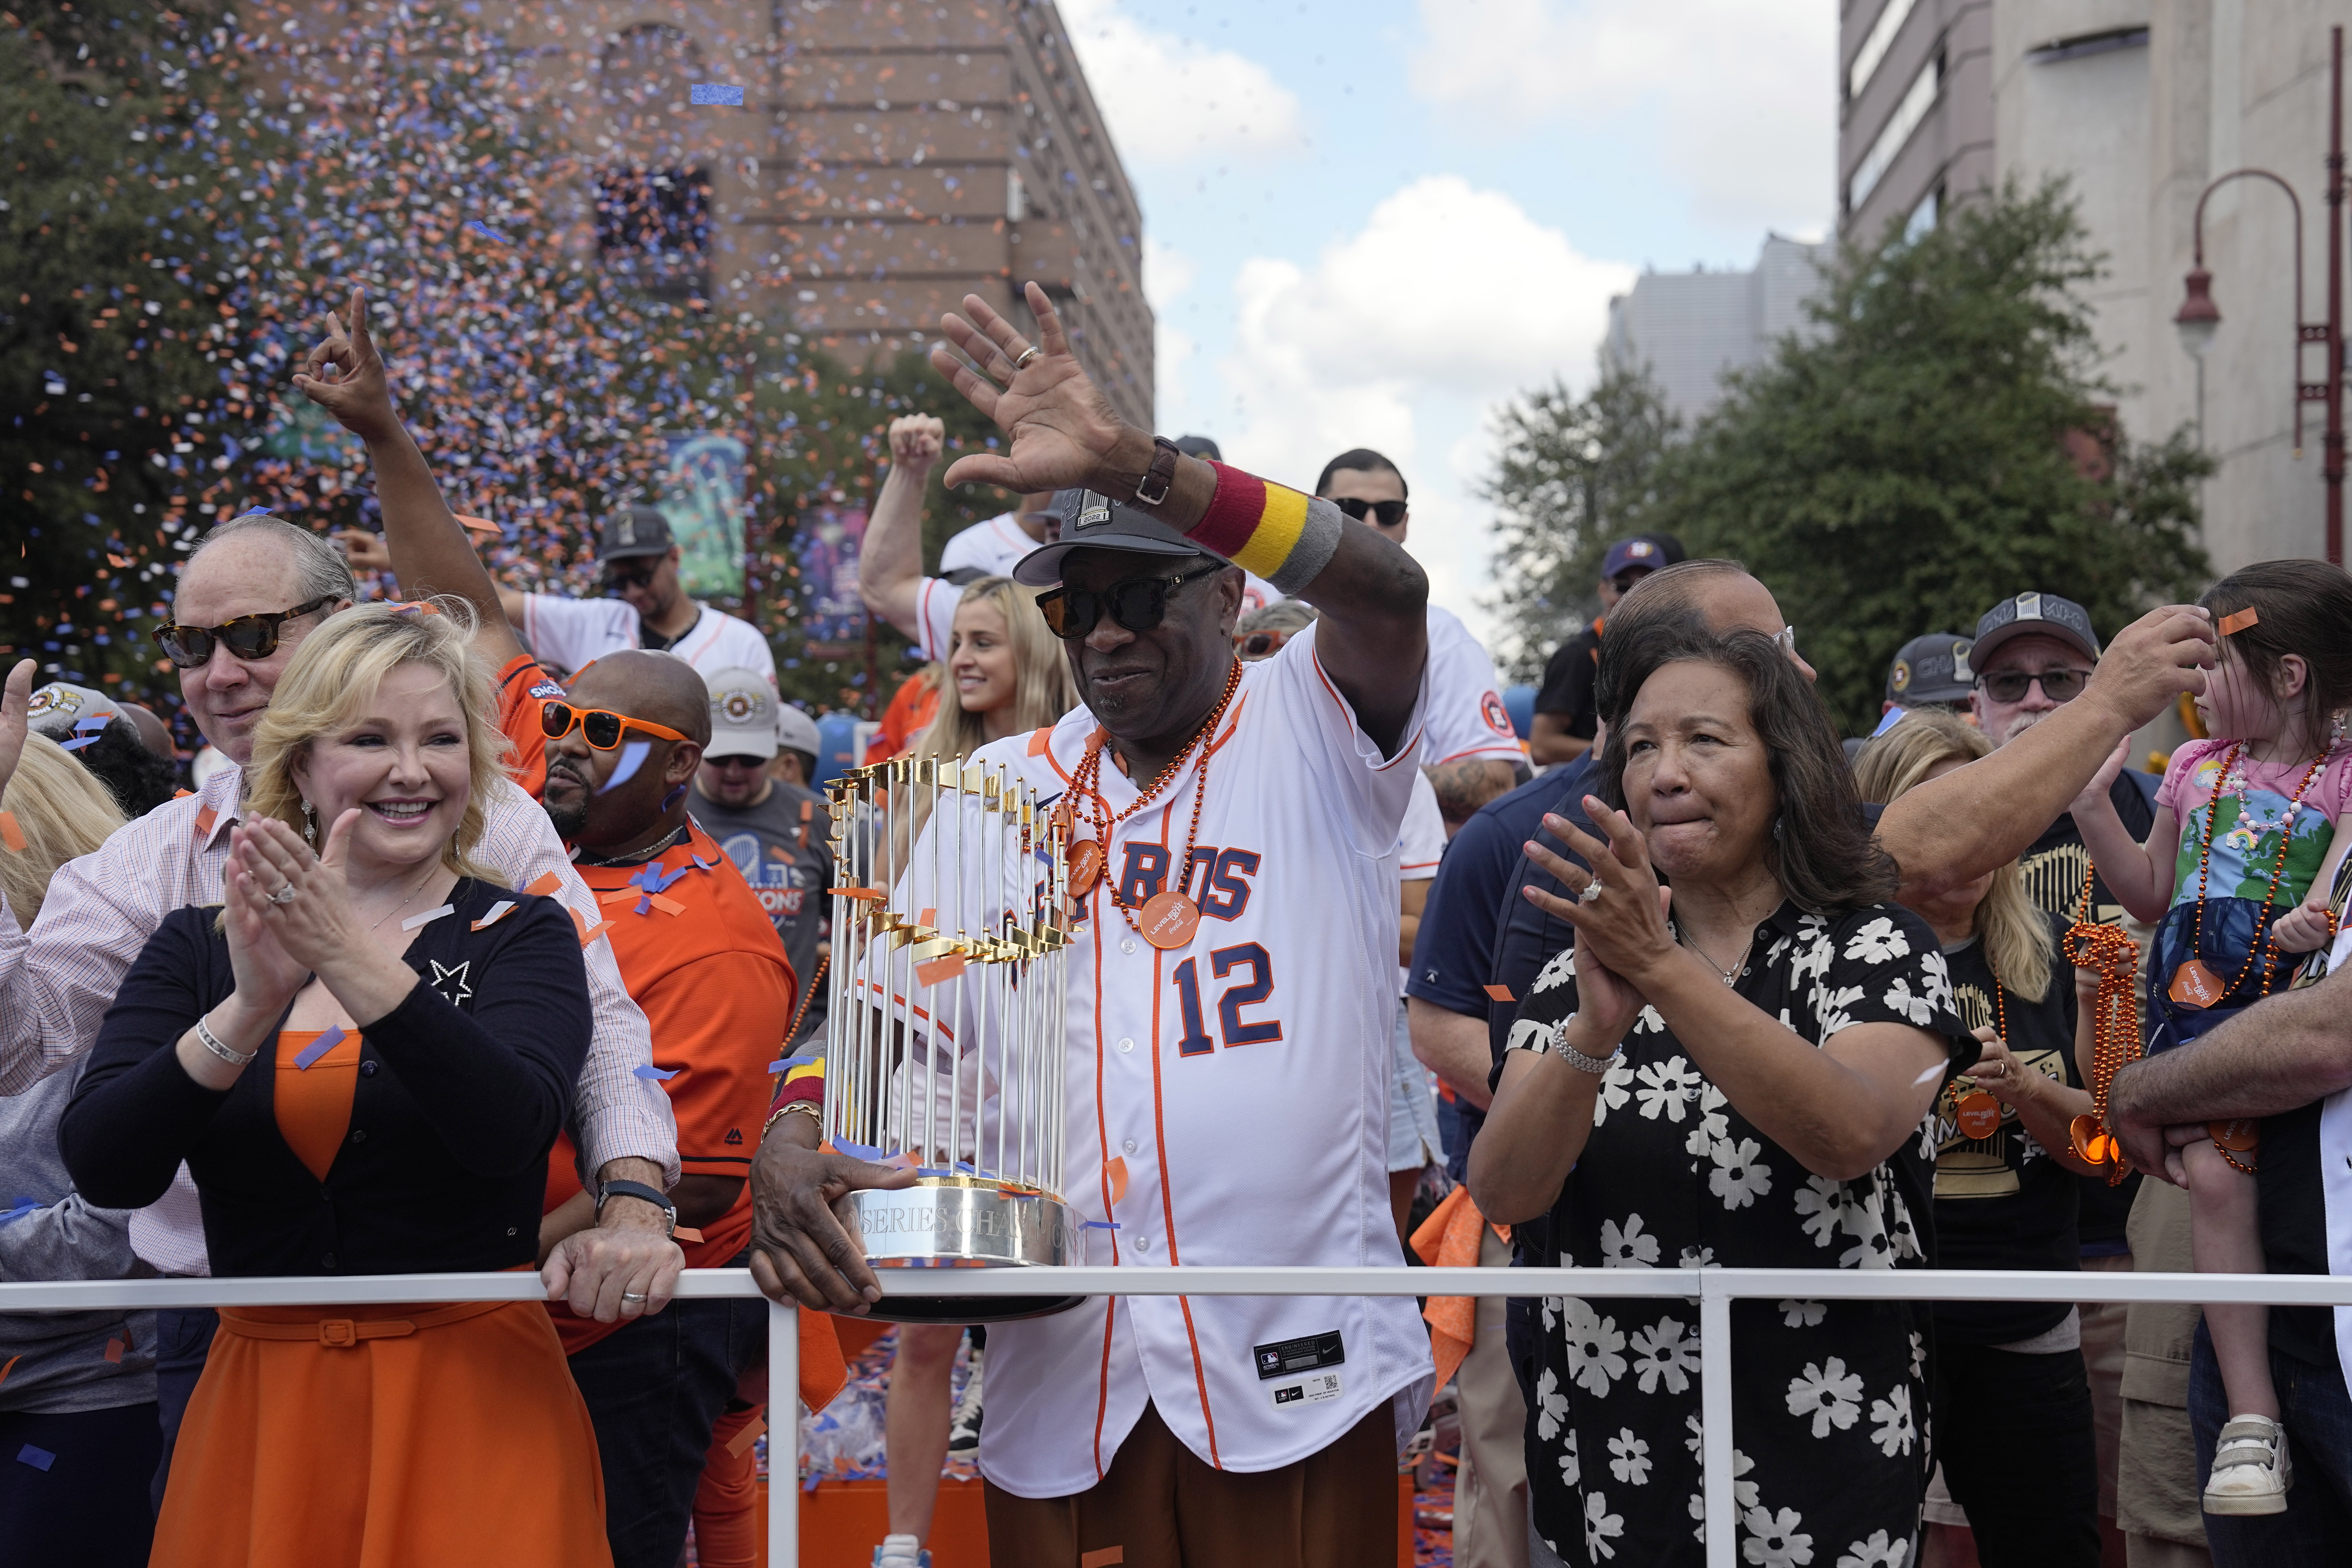 Mayor Turner Thanks Houston for Successful Astros Parade